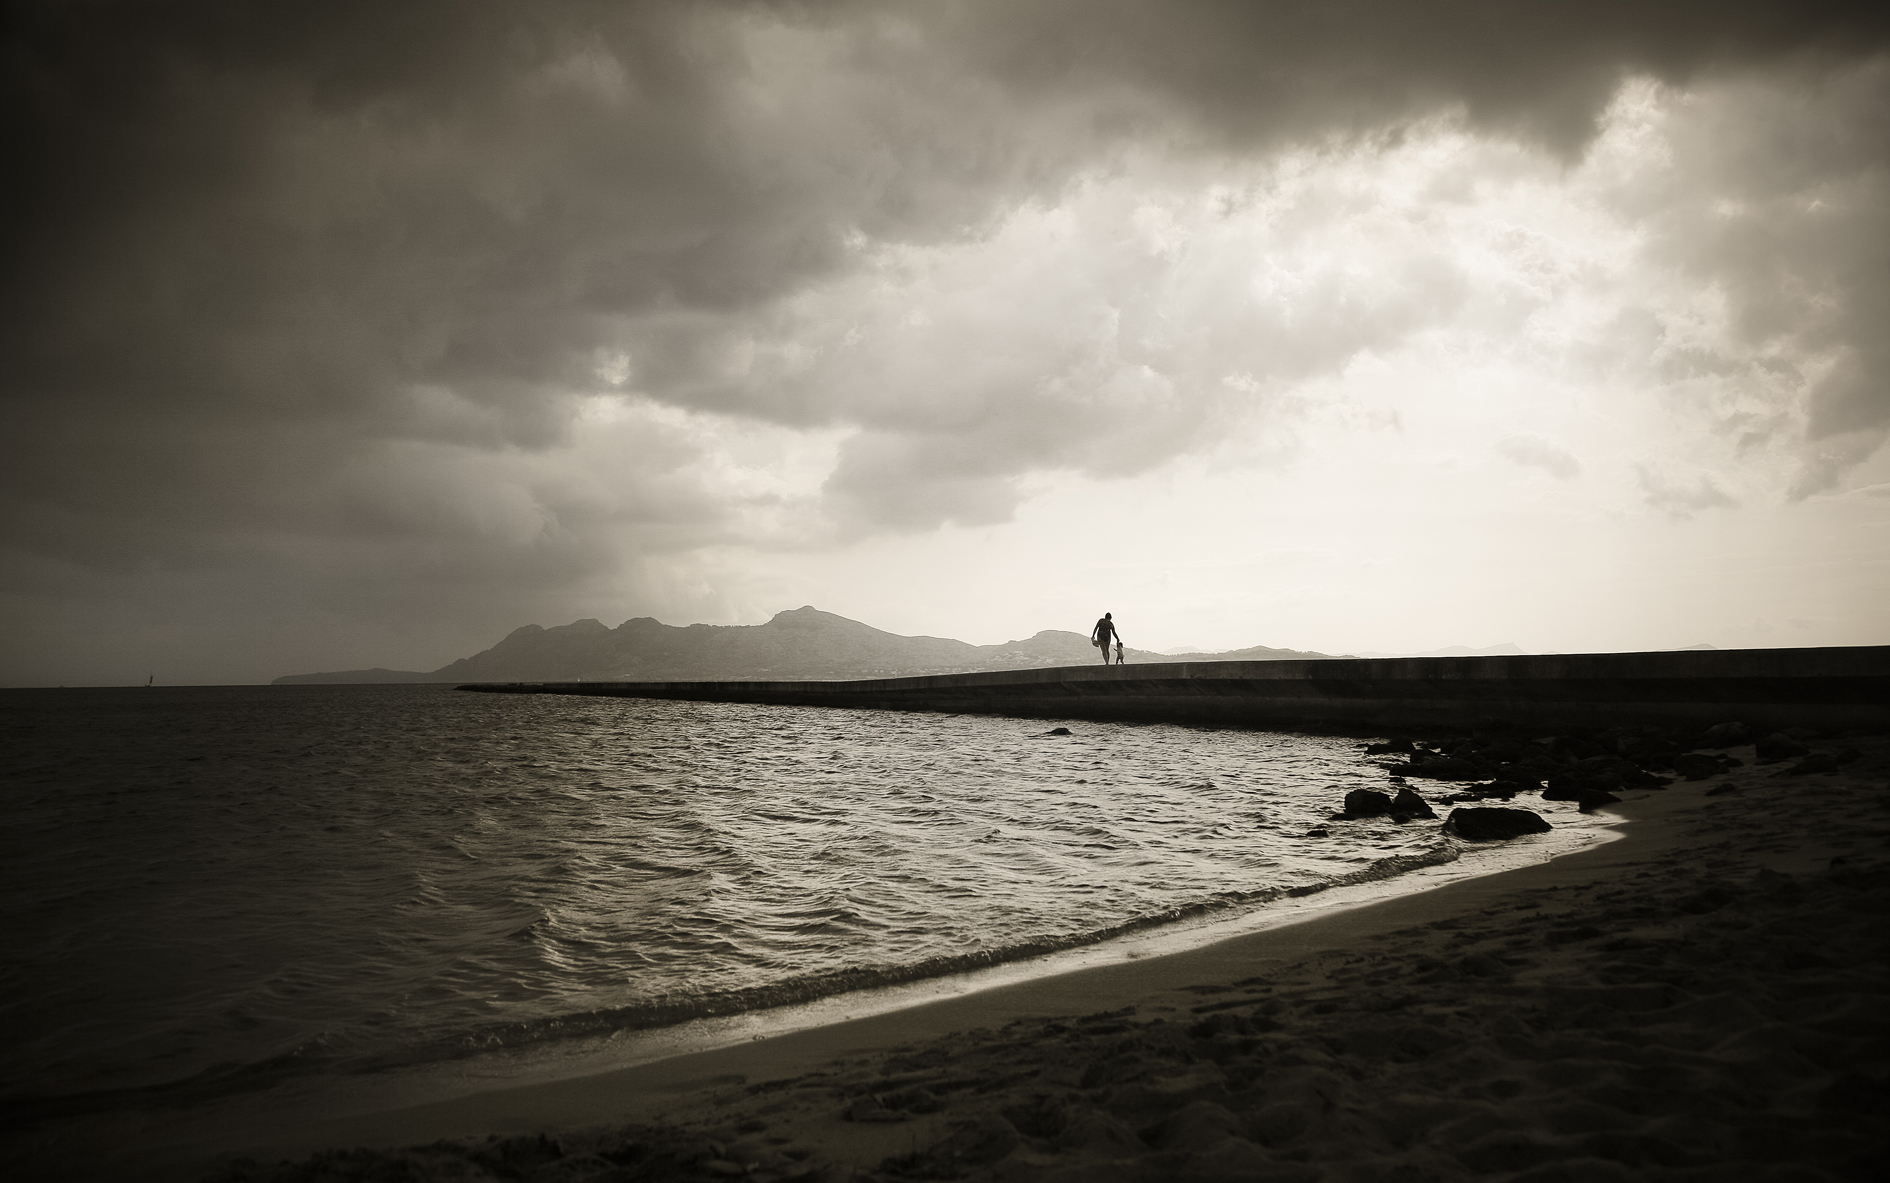 photography, photograph, art, fine art, Sepia, Black and white, B&W, Mallorca, beach, walking, mother and child, breakwater, storm, clouds, moody